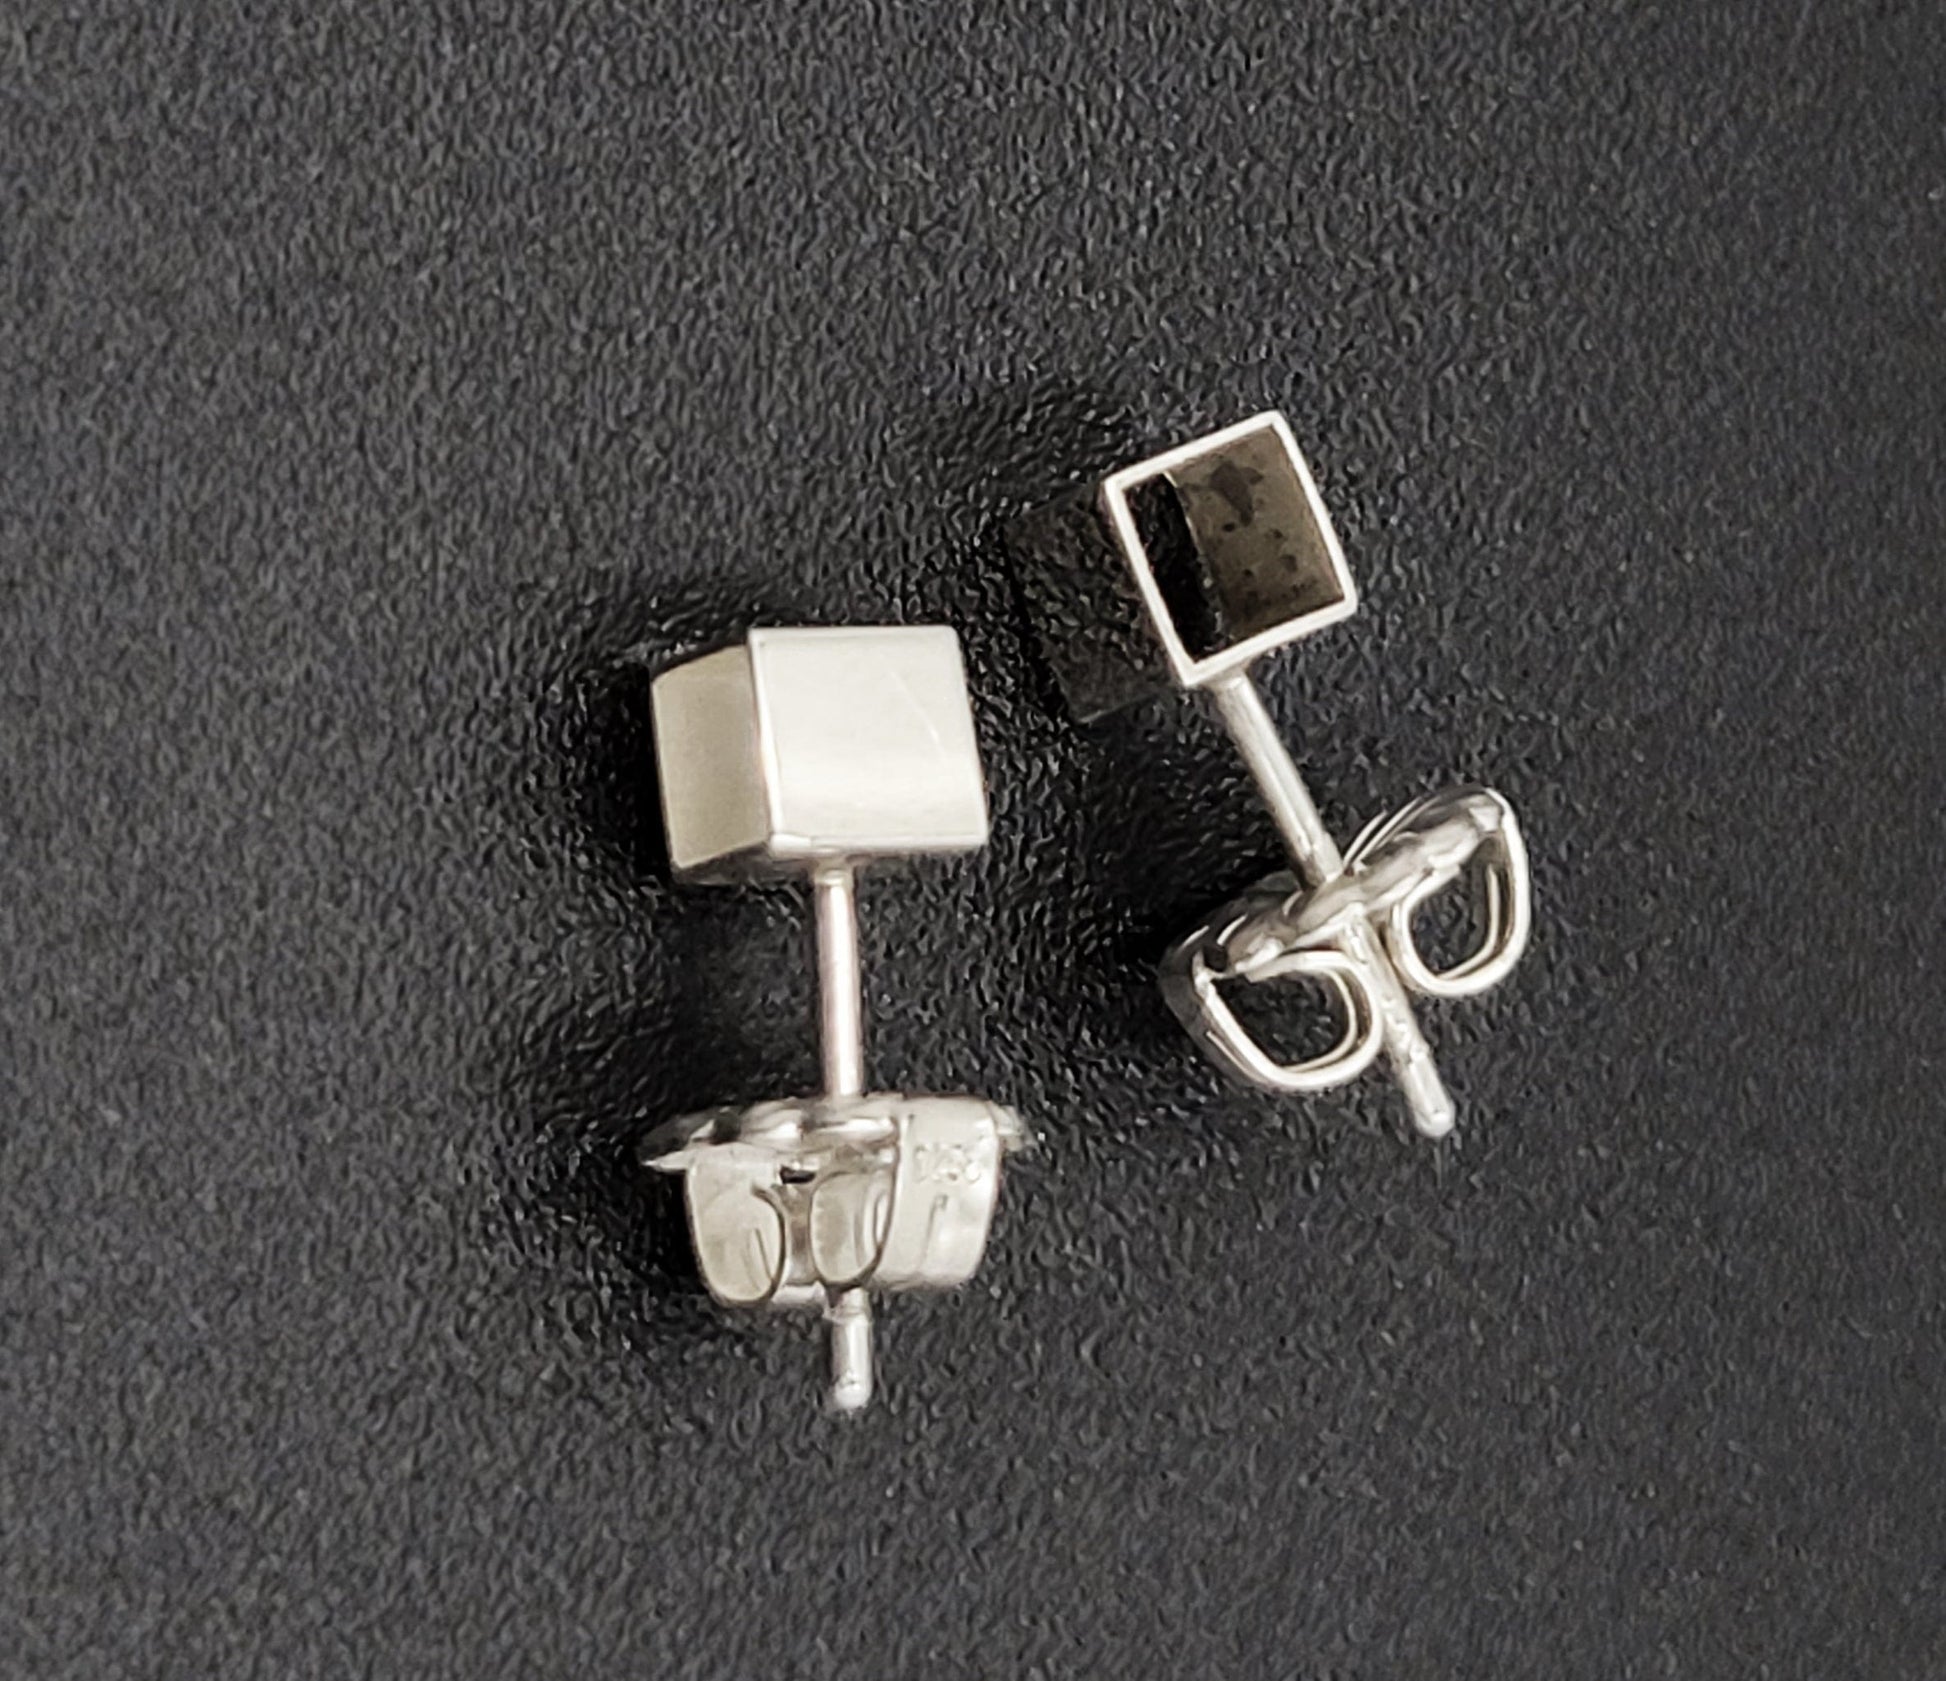 Betty Cooke Jewelry Sterling Iconic Betty Cooke Modernist Earrings Circa 1960s - In Transit